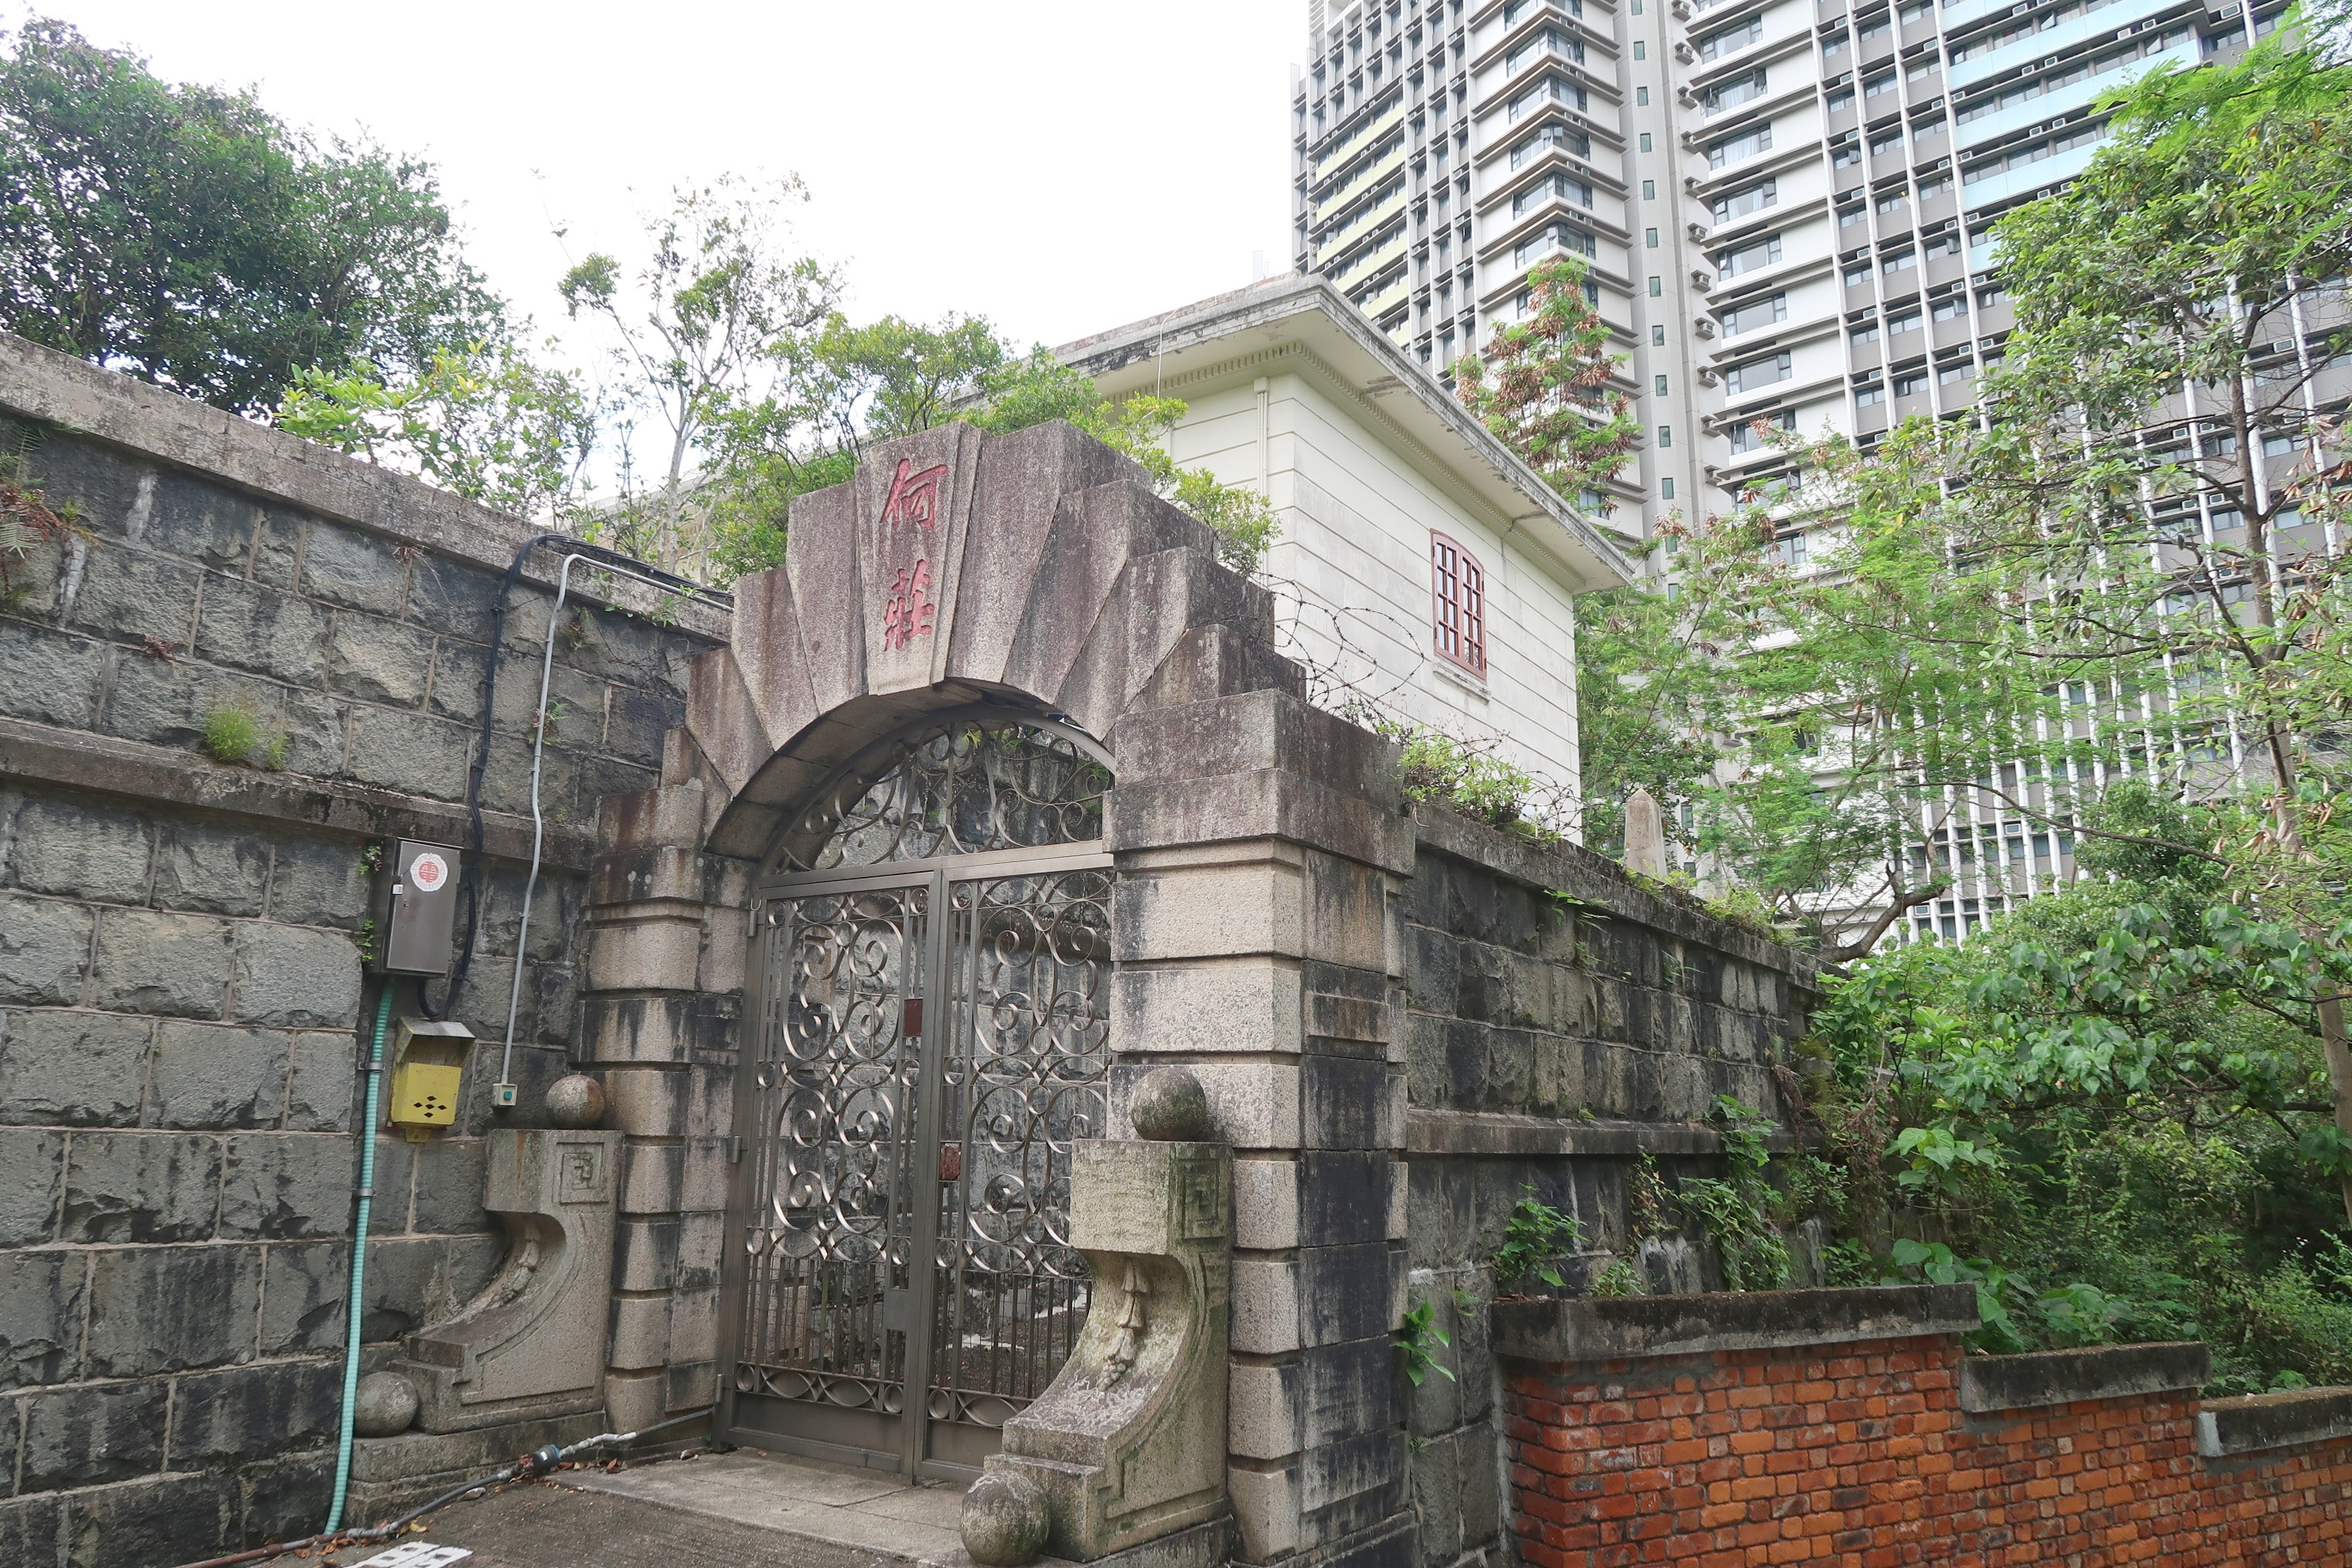 The main entrance gateway of Ho Chong features an architectural style similar to the main entrance of Kom Tong Hall. A firm believer of feng shui, Ho Kom-tong chose to build the family burial ground on the other side of the cemetery.